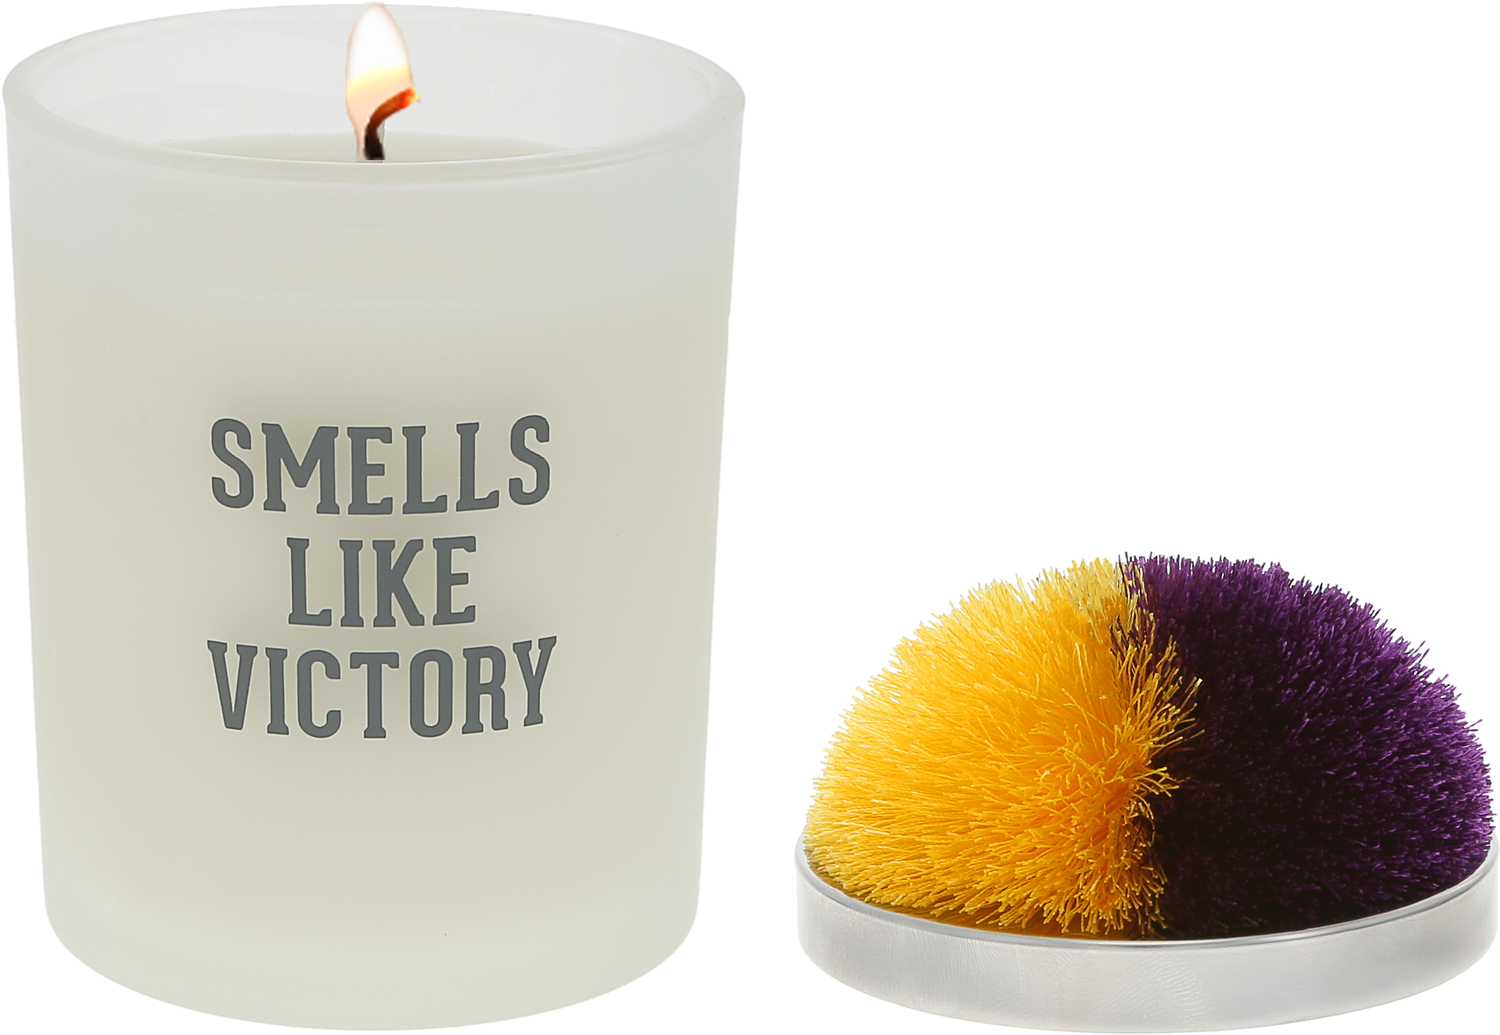 Victory - Purple & Yellow by Repre-Scent - Victory - Purple & Yellow - 5.5 oz - 100% Soy Wax Candle with Pom Pom Lid
Scent: Tranquility